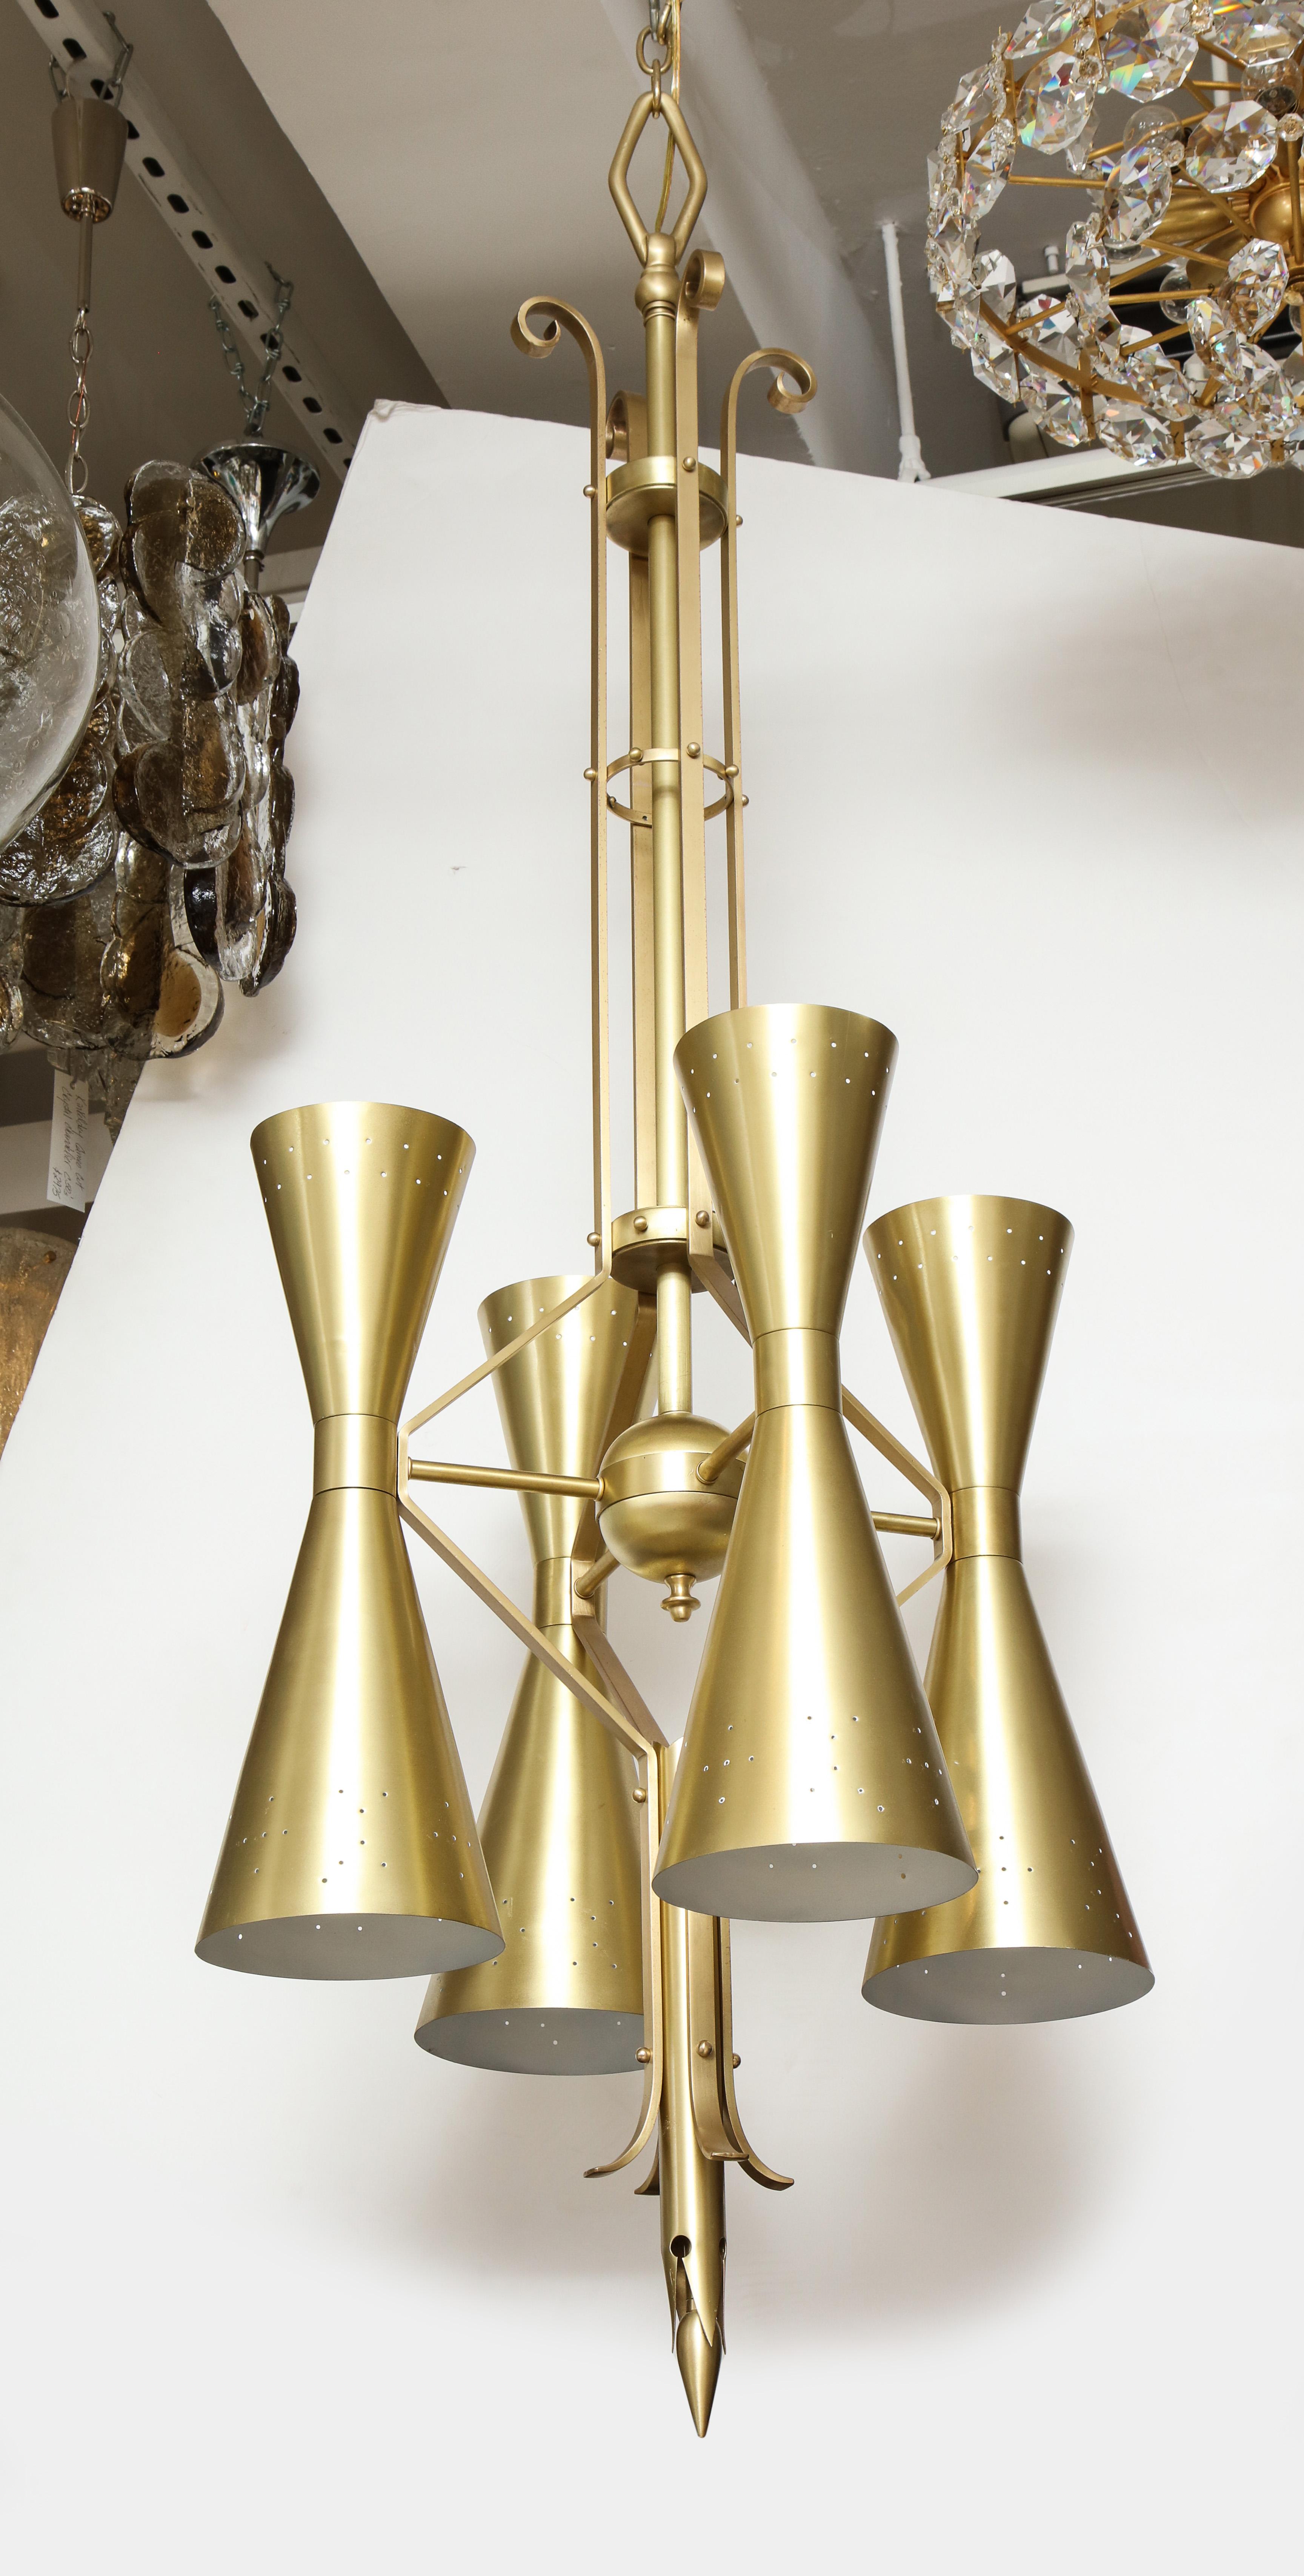 Italian modernist satin brass chandelier with 8-light sources. Chandelier is constructed of solid brass elements and has an architectural flair. Comes with approximately 3ft of chain and canopy. Rewired for use in USA.

Currently 2 are available